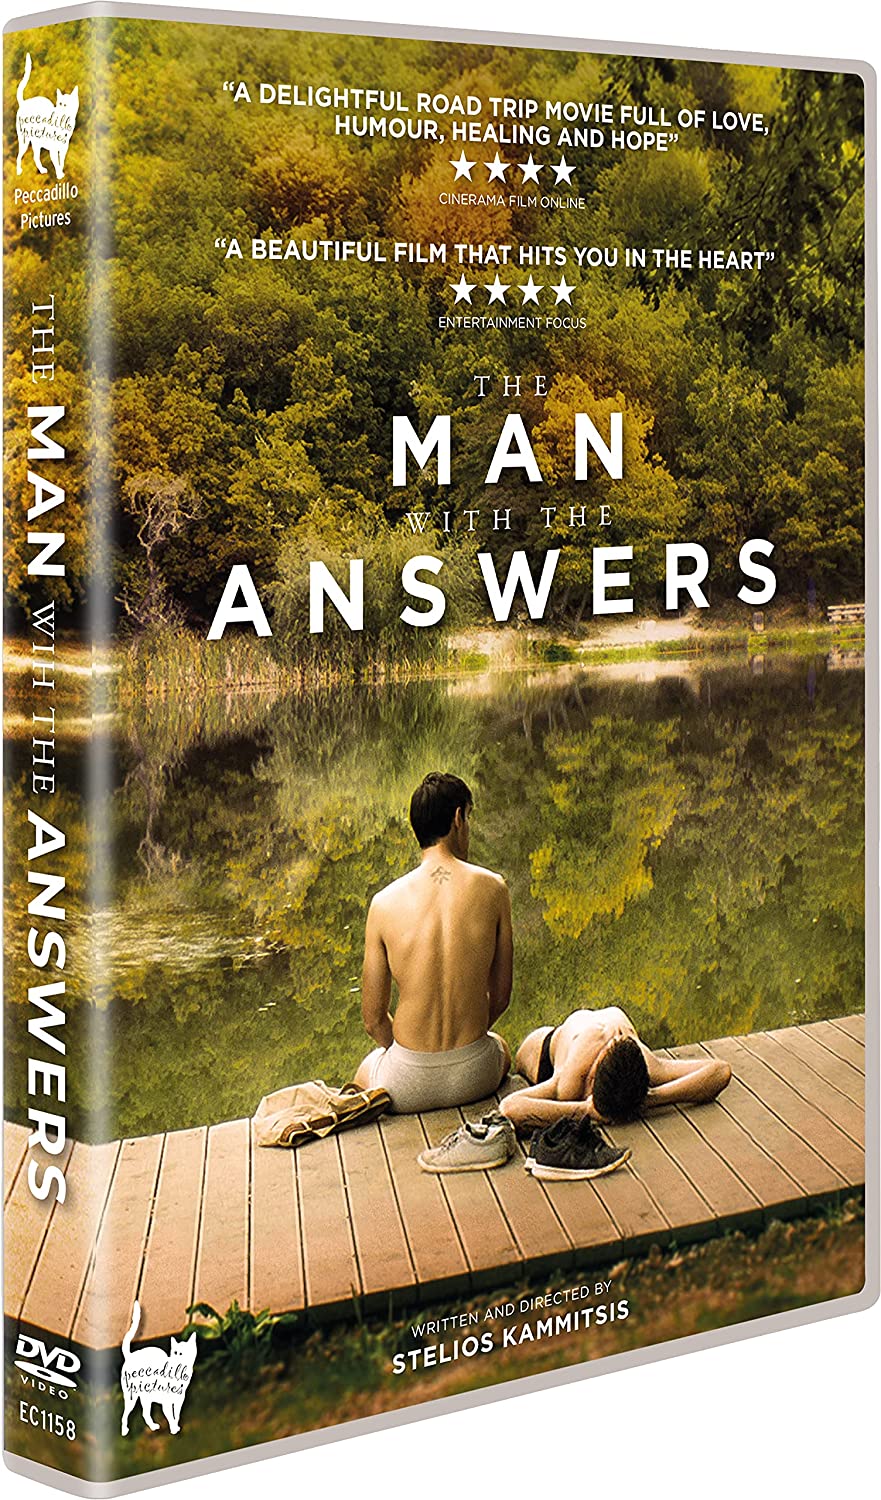 The Man with the Answers [DVD]